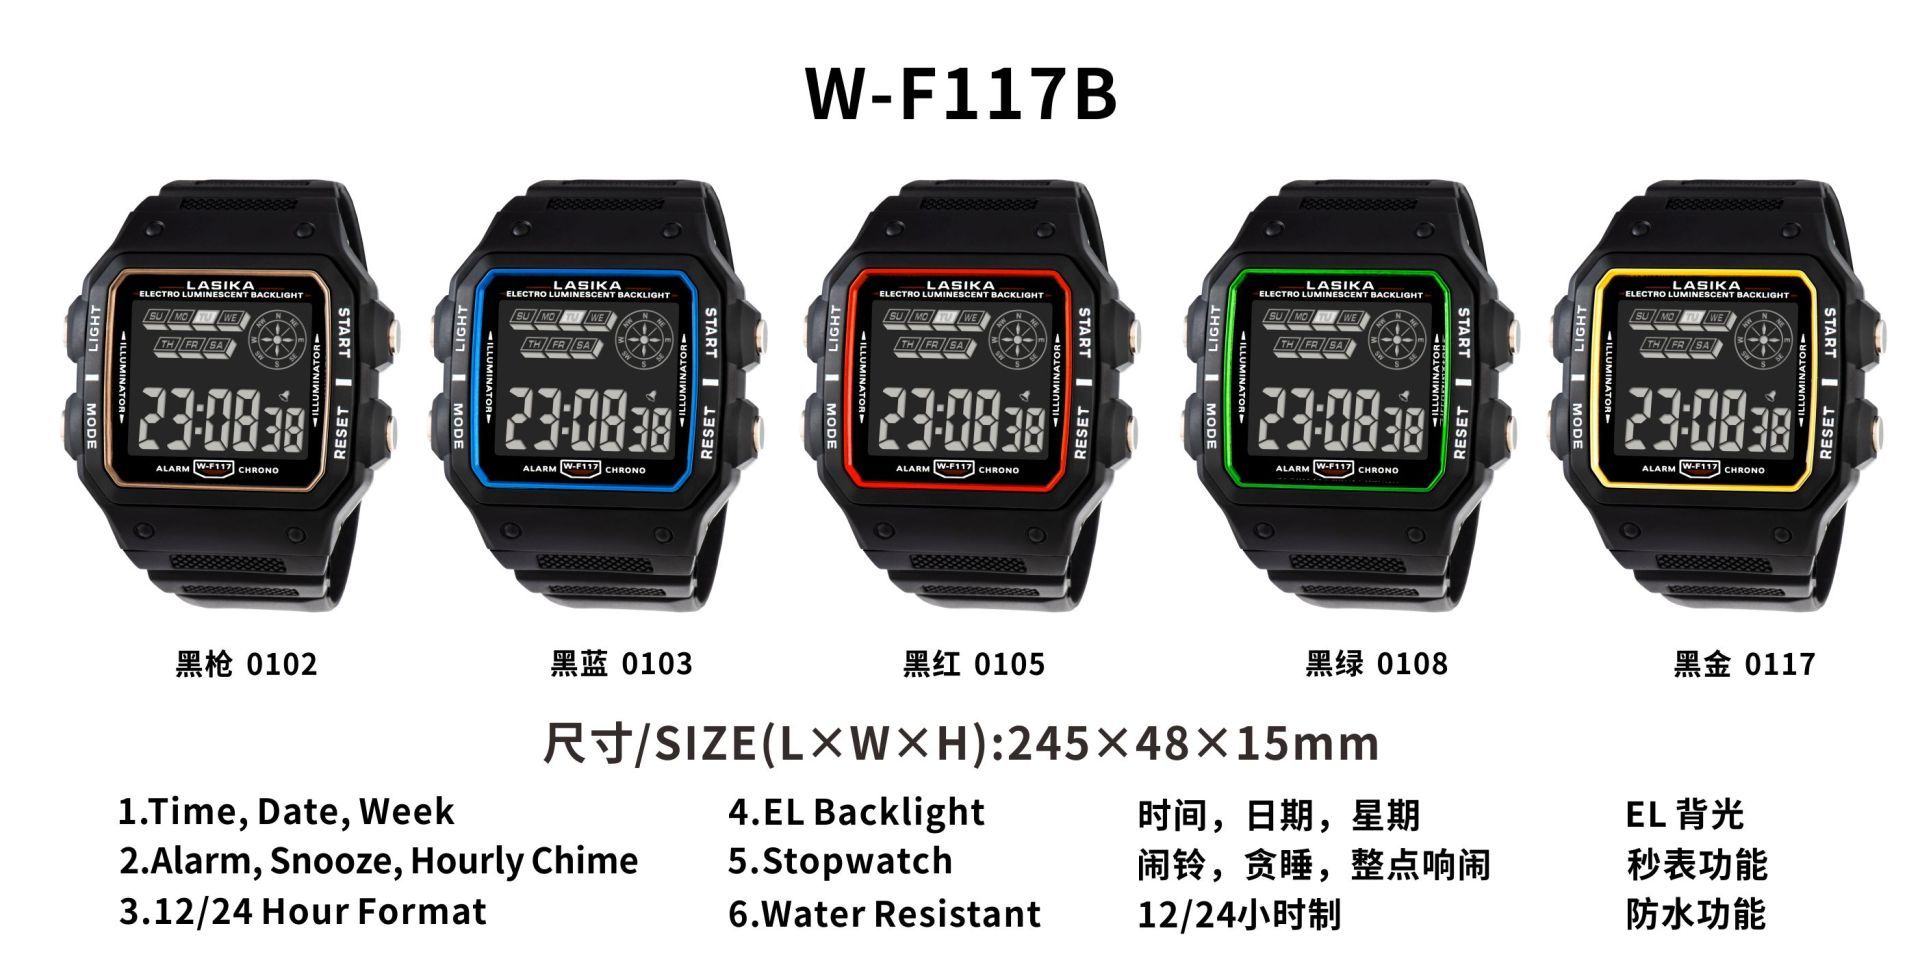 What are the functions of digital sports watches